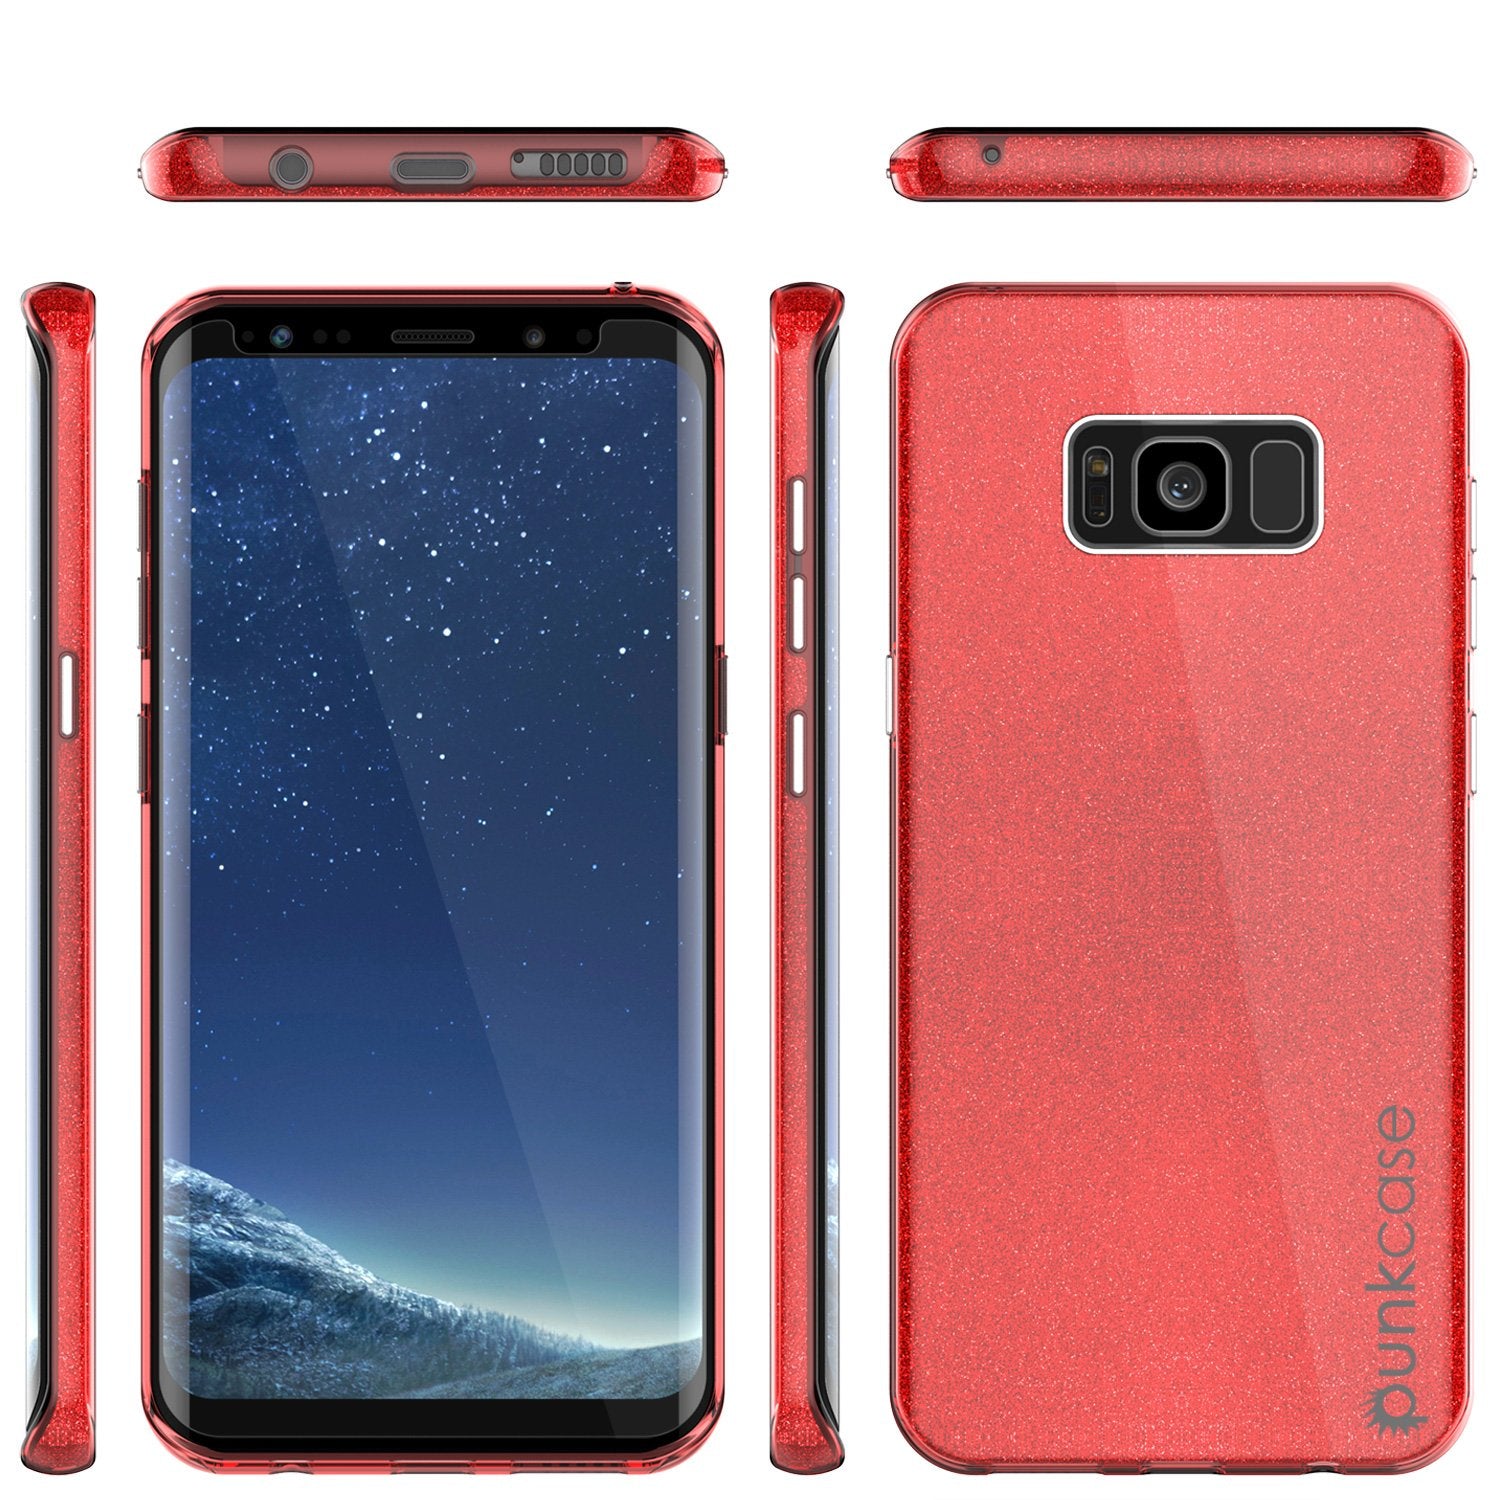 Galaxy S8 Case, Punkcase Galactic 2.0 Series Ultra Slim Protective Armor TPU Cover w/ PunkShield Screen Protector | Lifetime Exchange Warranty | Designed for Samsung Galaxy S8 [Red] - PunkCase NZ